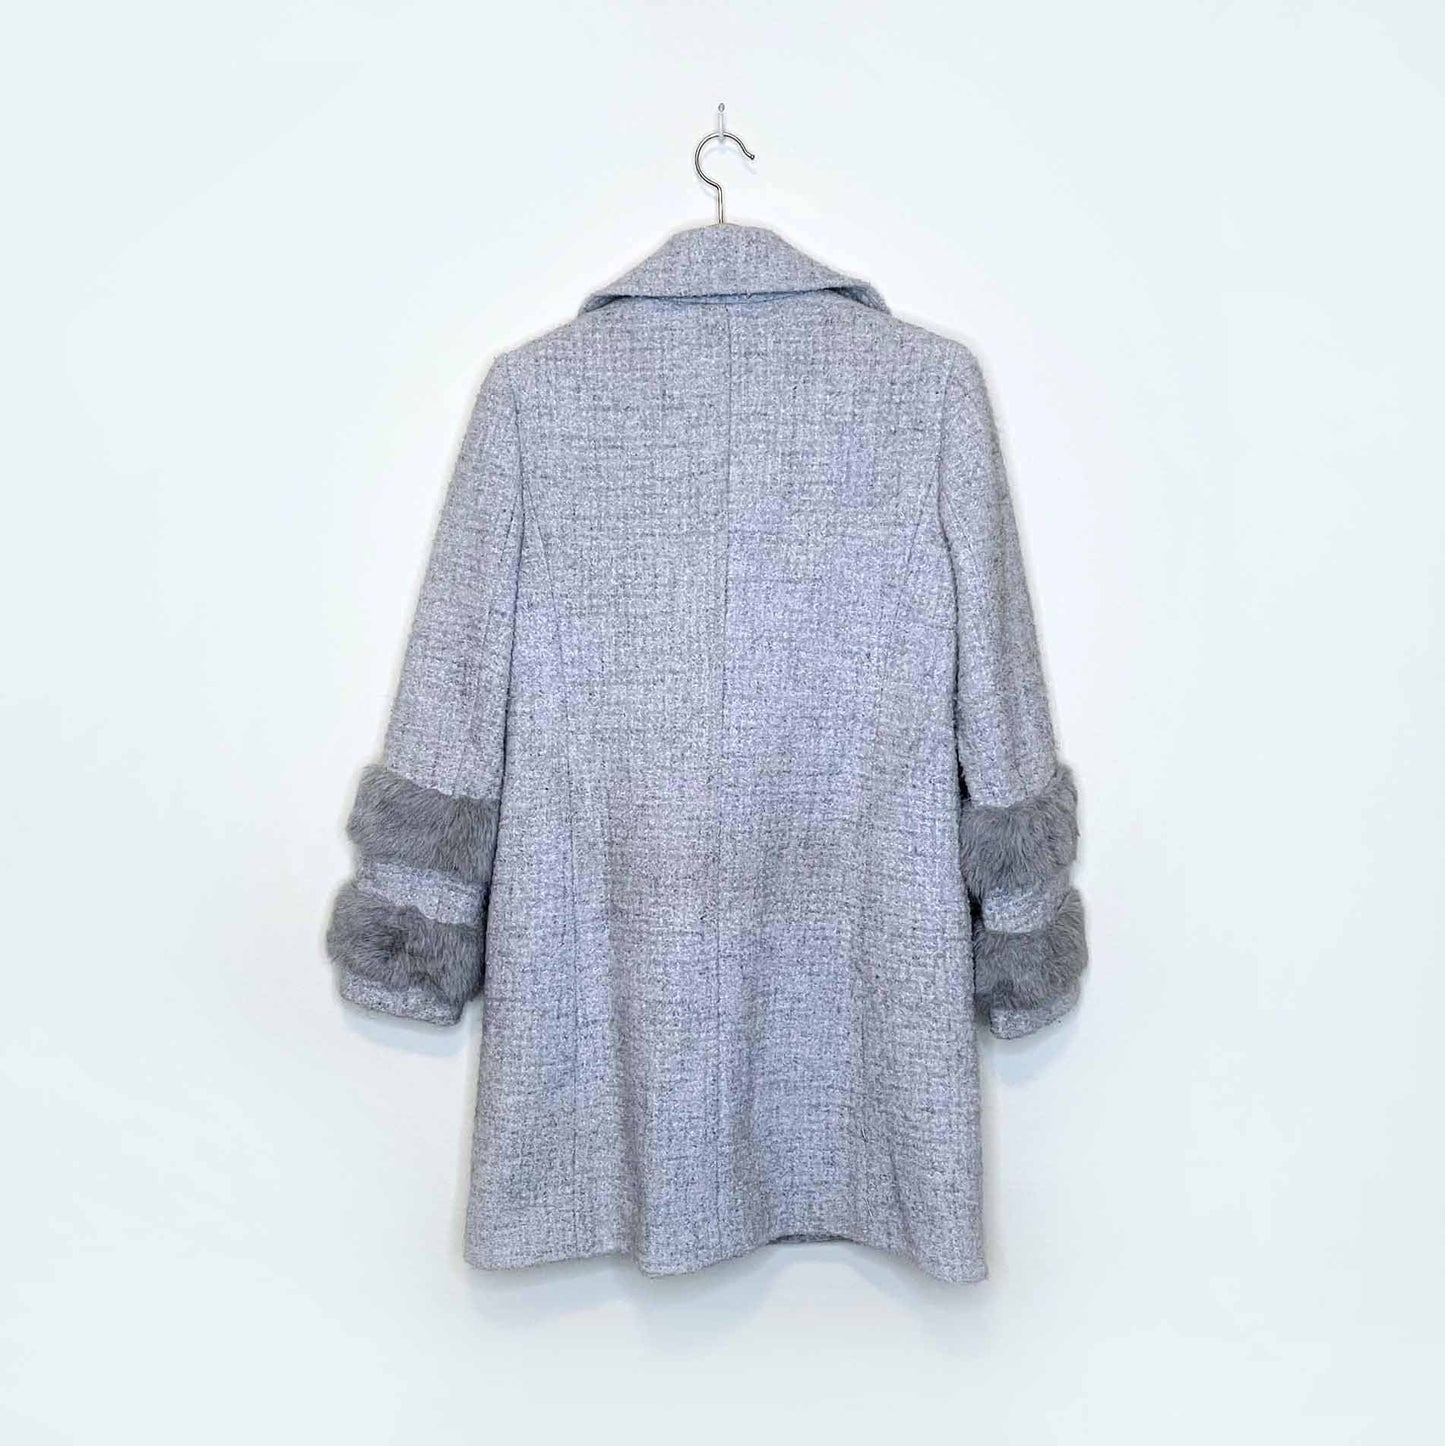 club monaco wool-blend boucle jacket with fur cuffs - size small